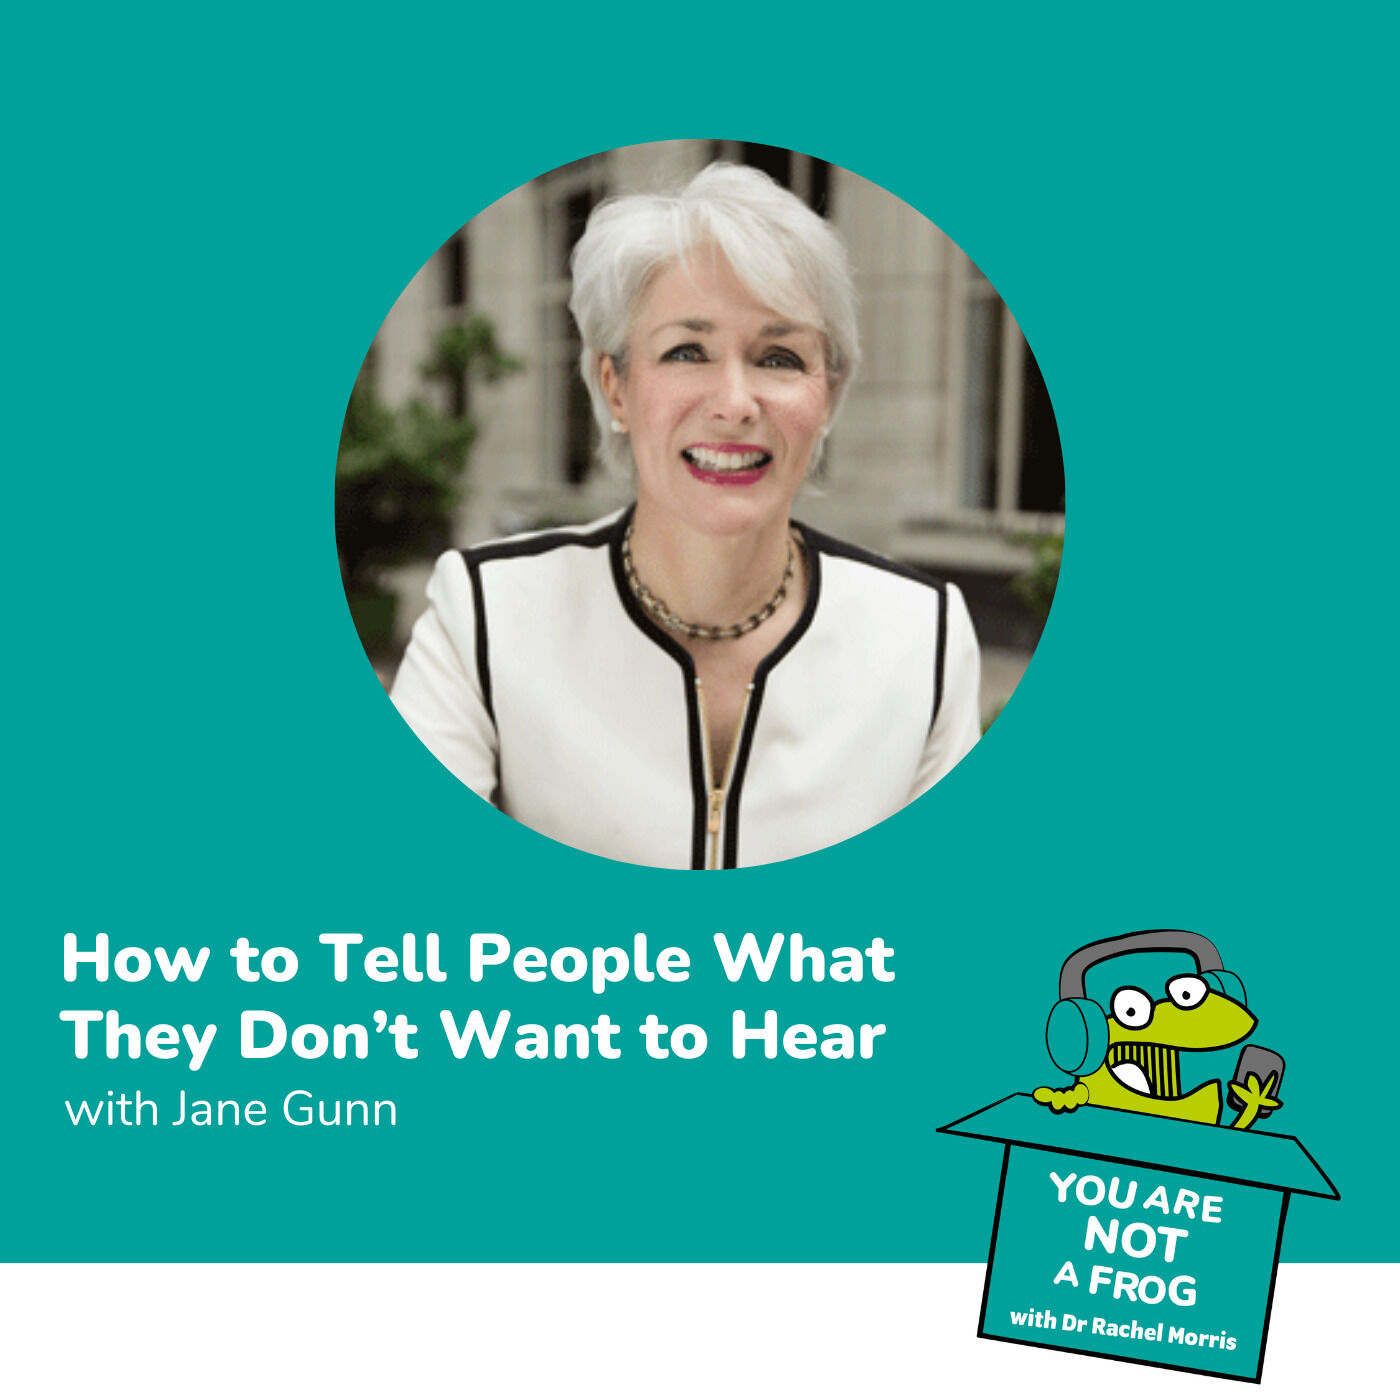 How to Tell People What They Don’t Want to Hear